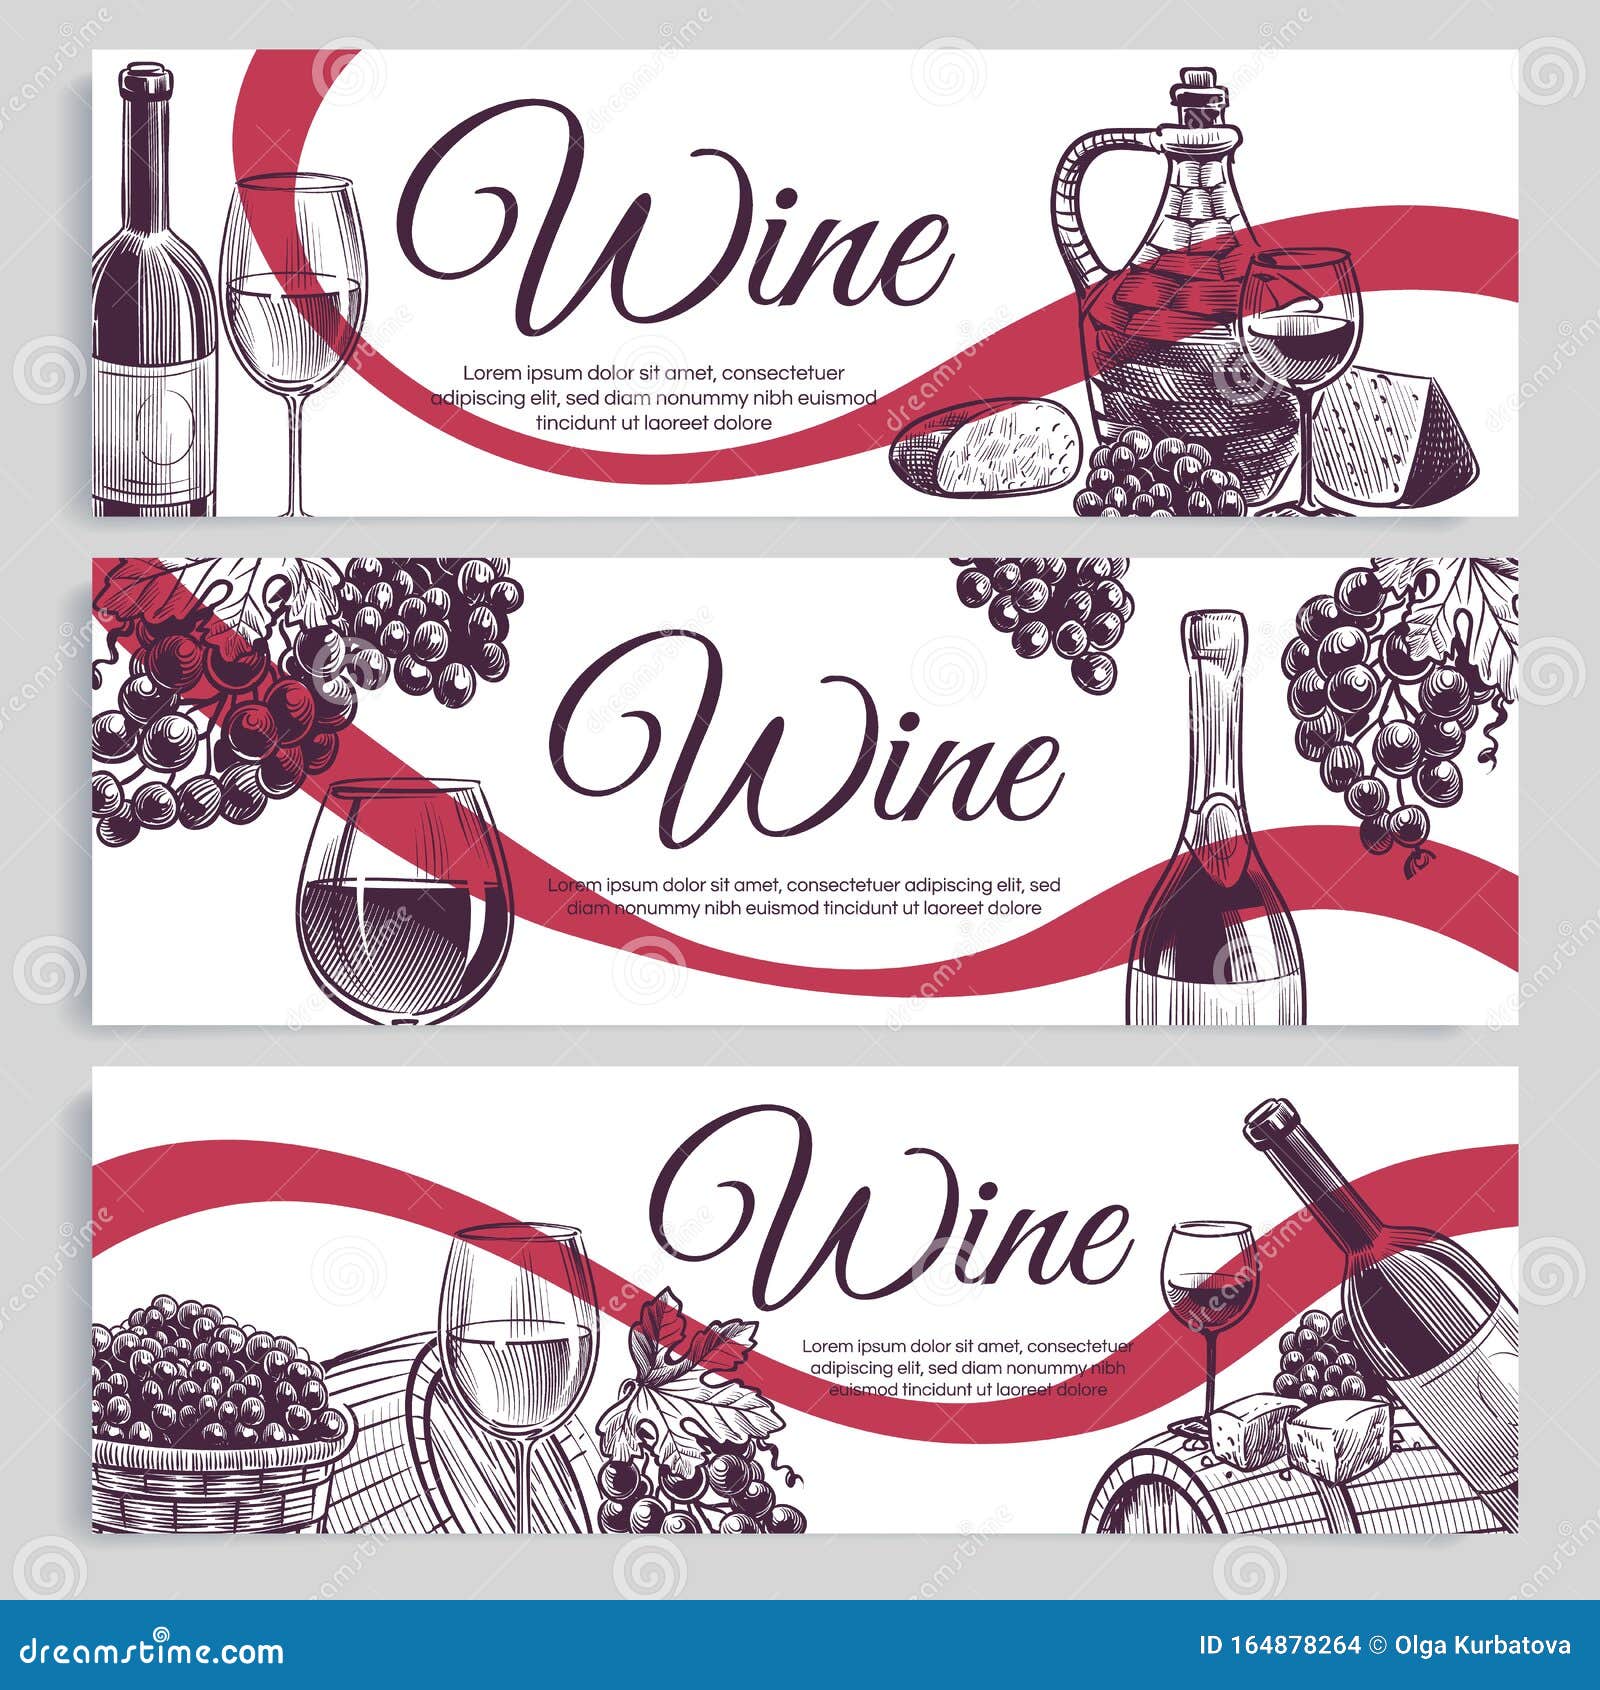 sketch wine banners. classic alcoholic drink bottles and wineglasses, grapes. promotion winery and vineyard hand drawn